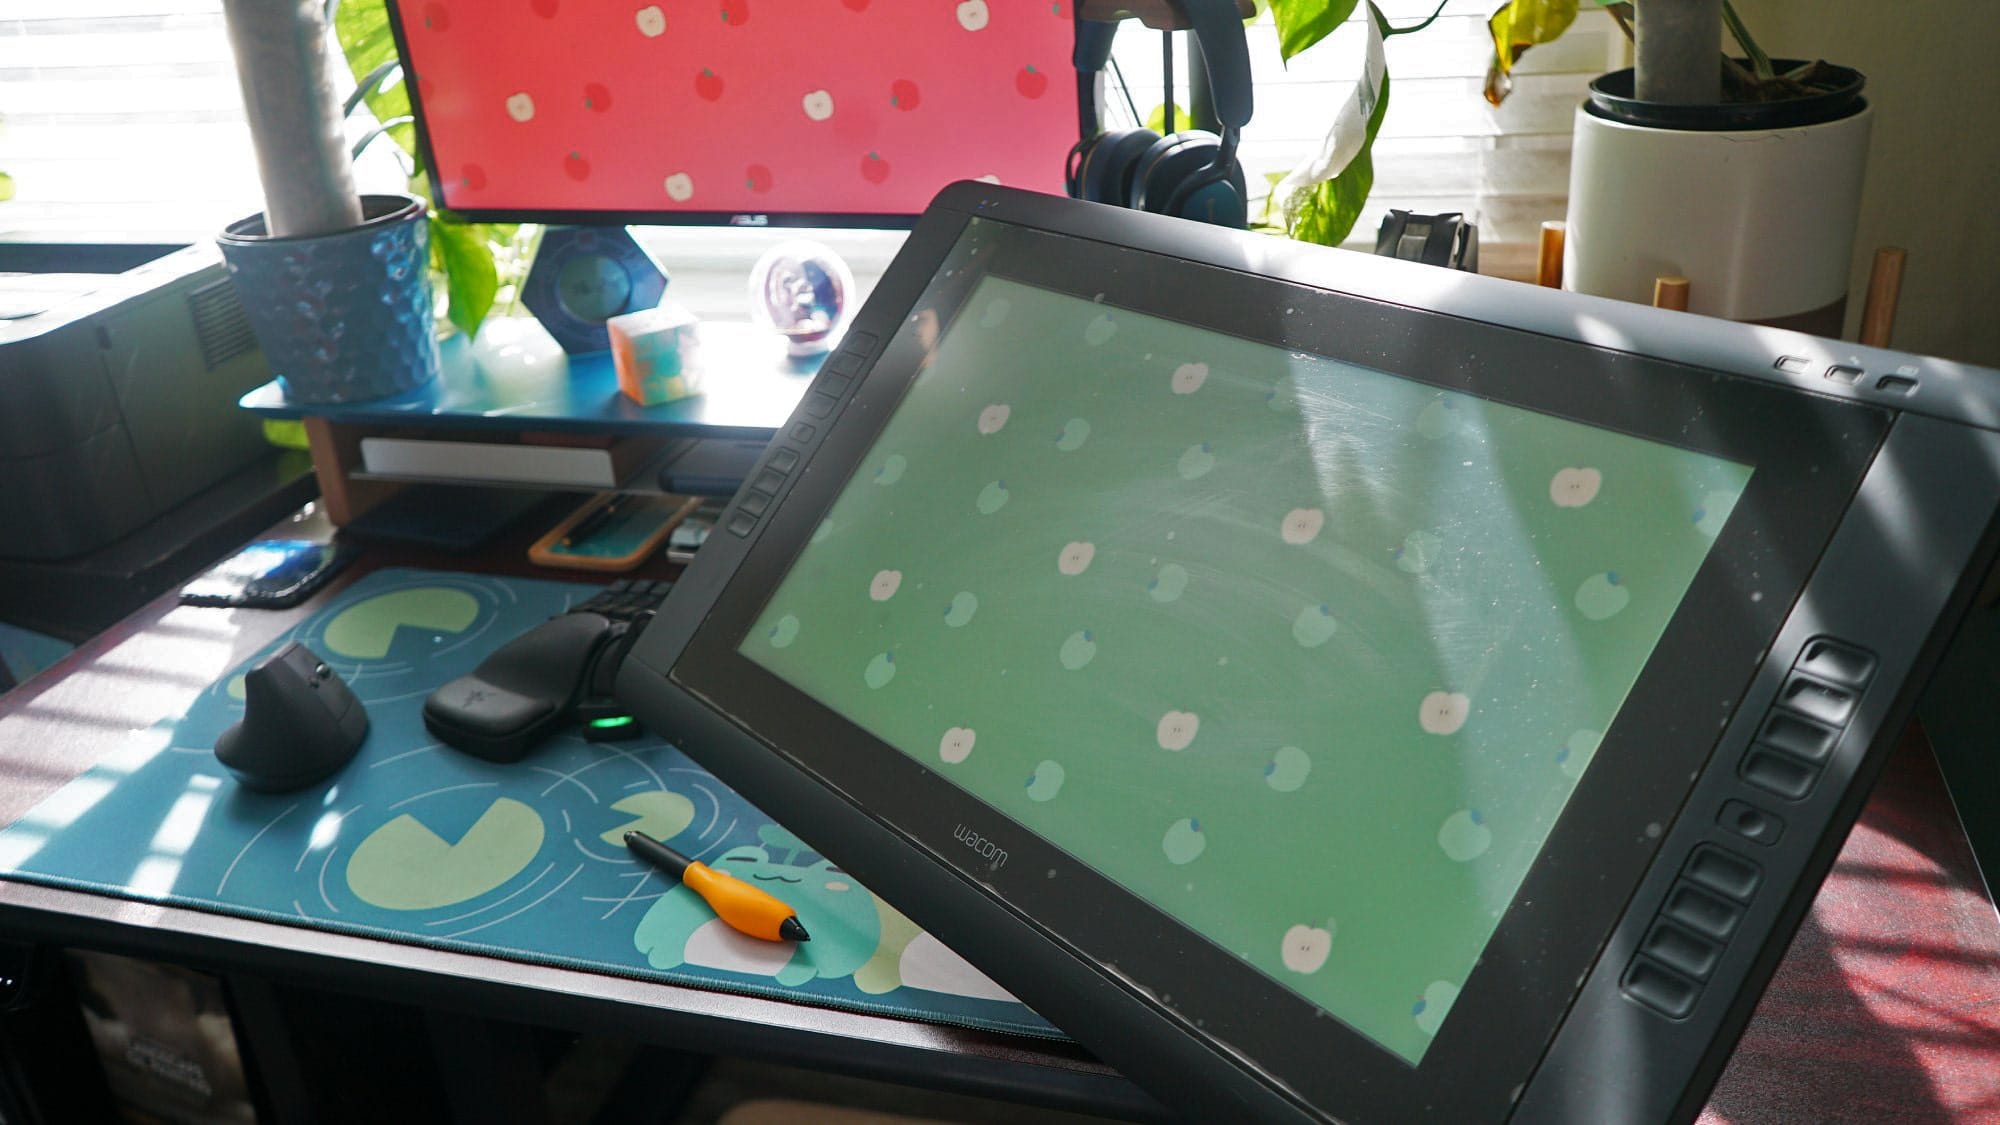  A brightly lit workspace featuring a graphic tablet and stylus, ergonomic mouse, and a monitor with a colourful background, surrounded by indoor plants